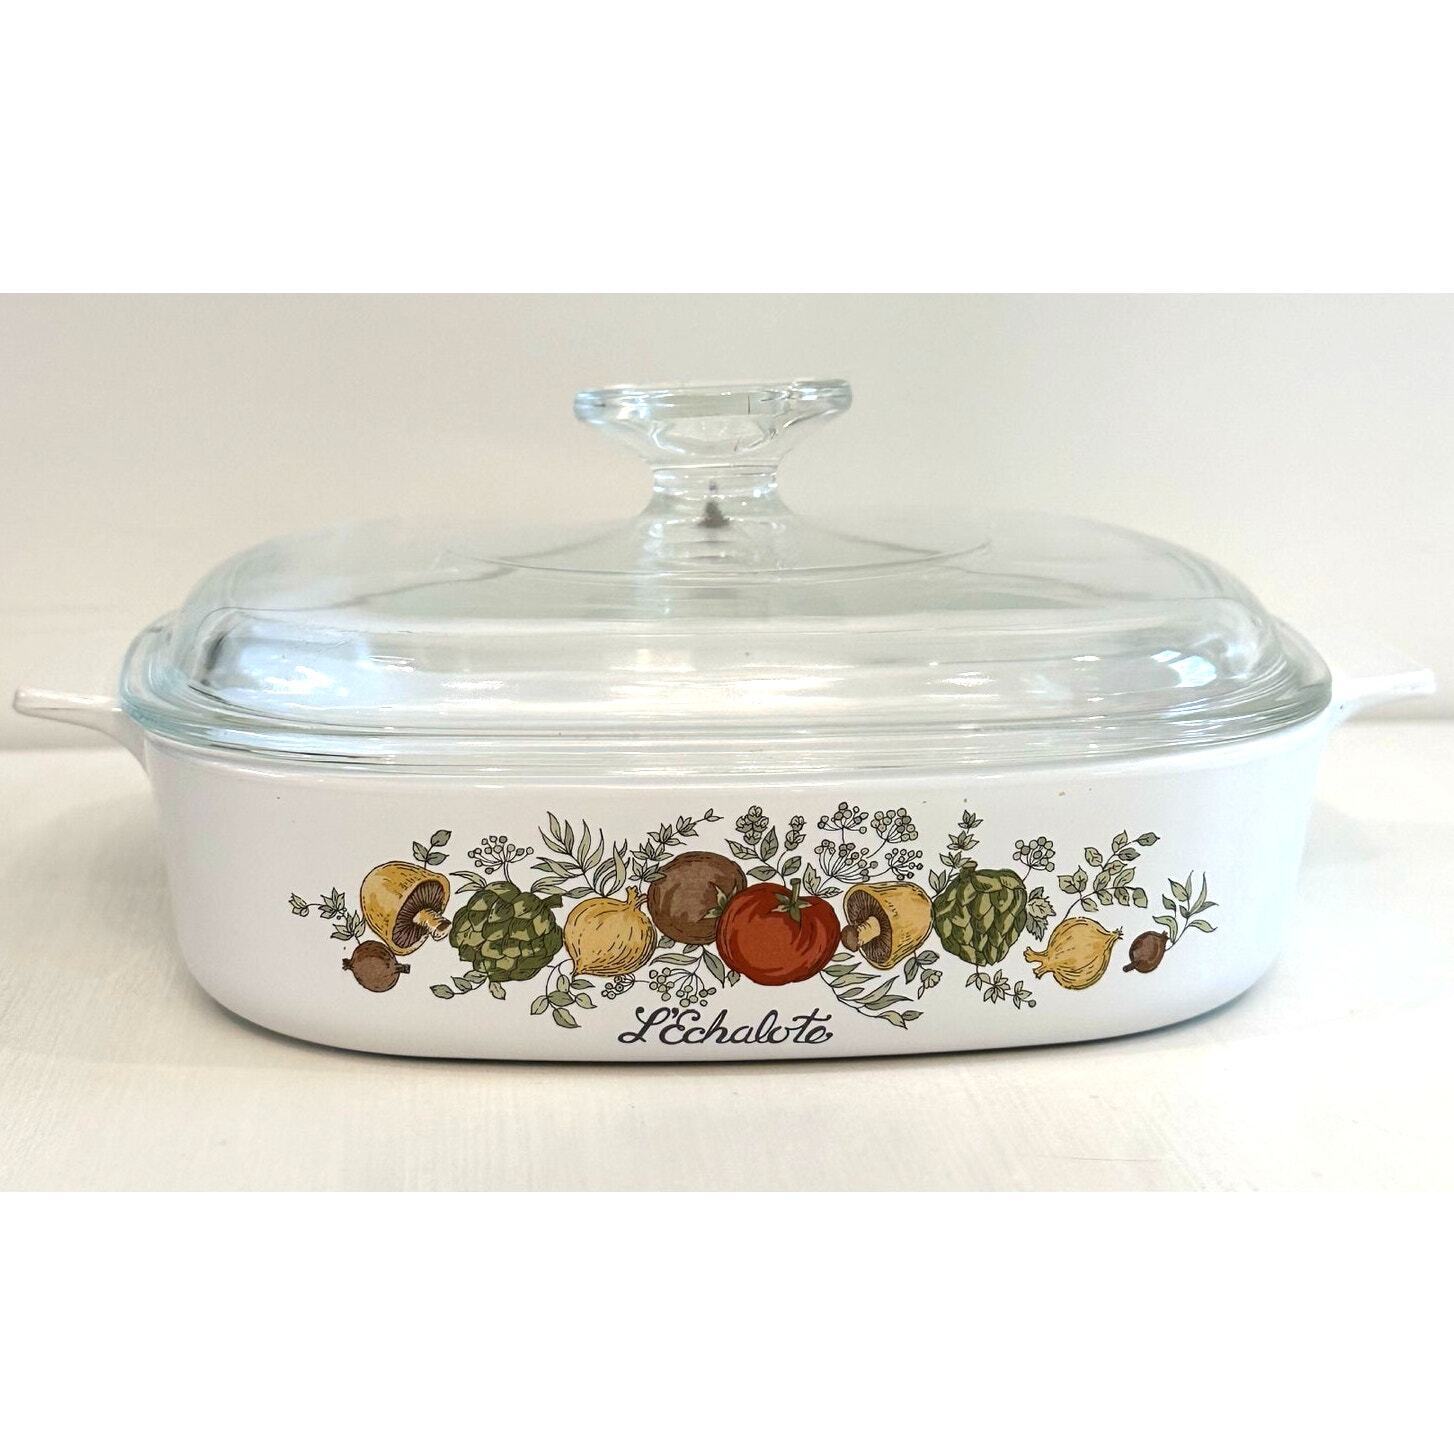 Corning Ware L’ Echalote Spice of Life A8B Casserole Dish with Lid-1 QT